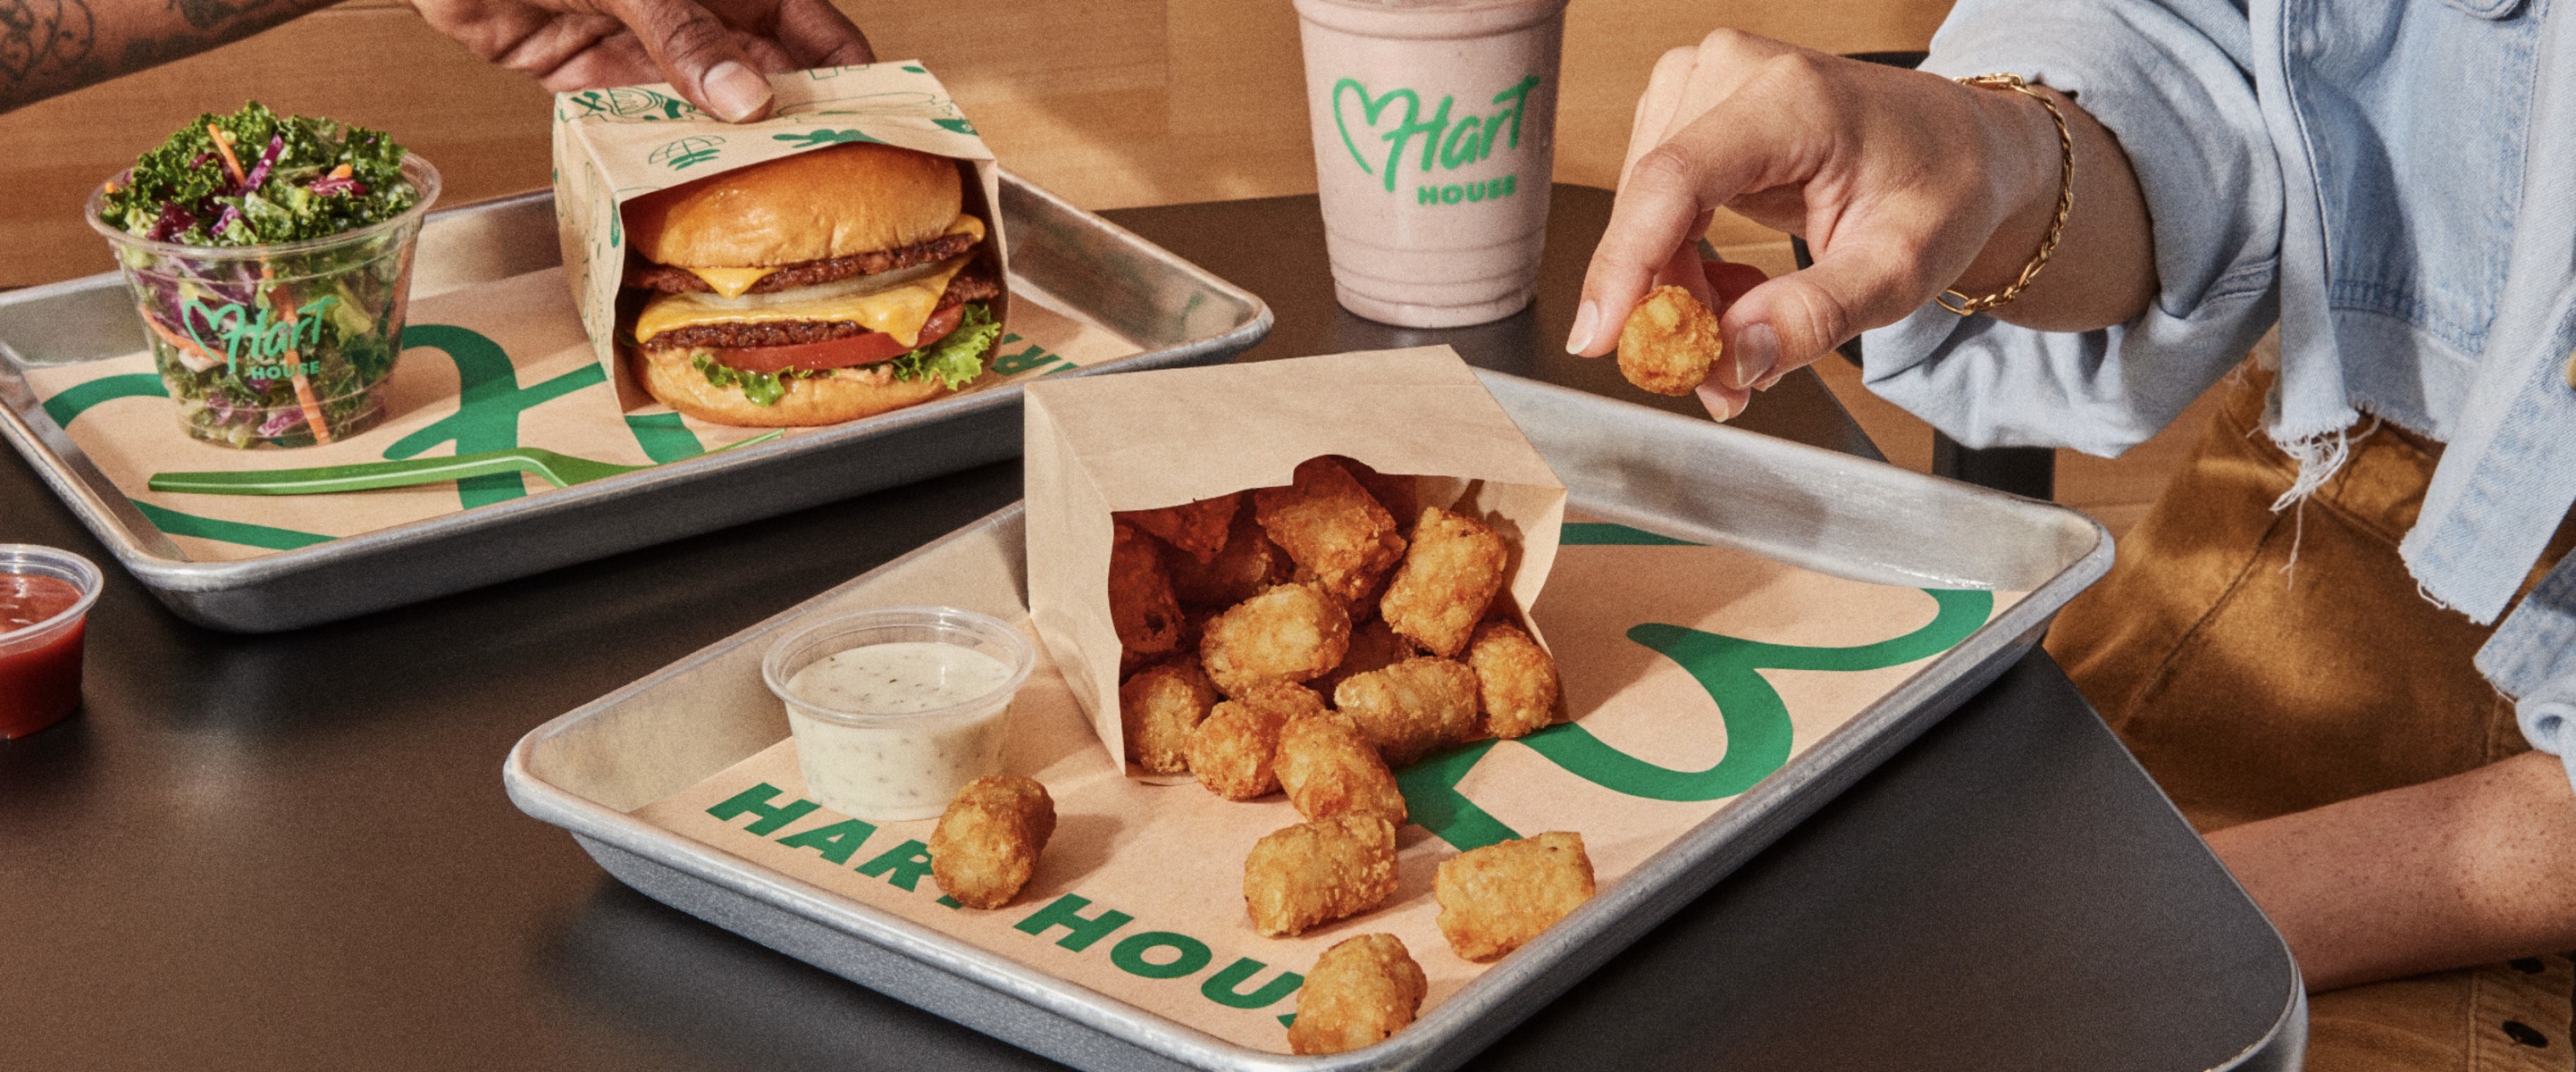 Fast Food Gets a Vegan Makeover at These 12 Plant-Based Restaurant Chains